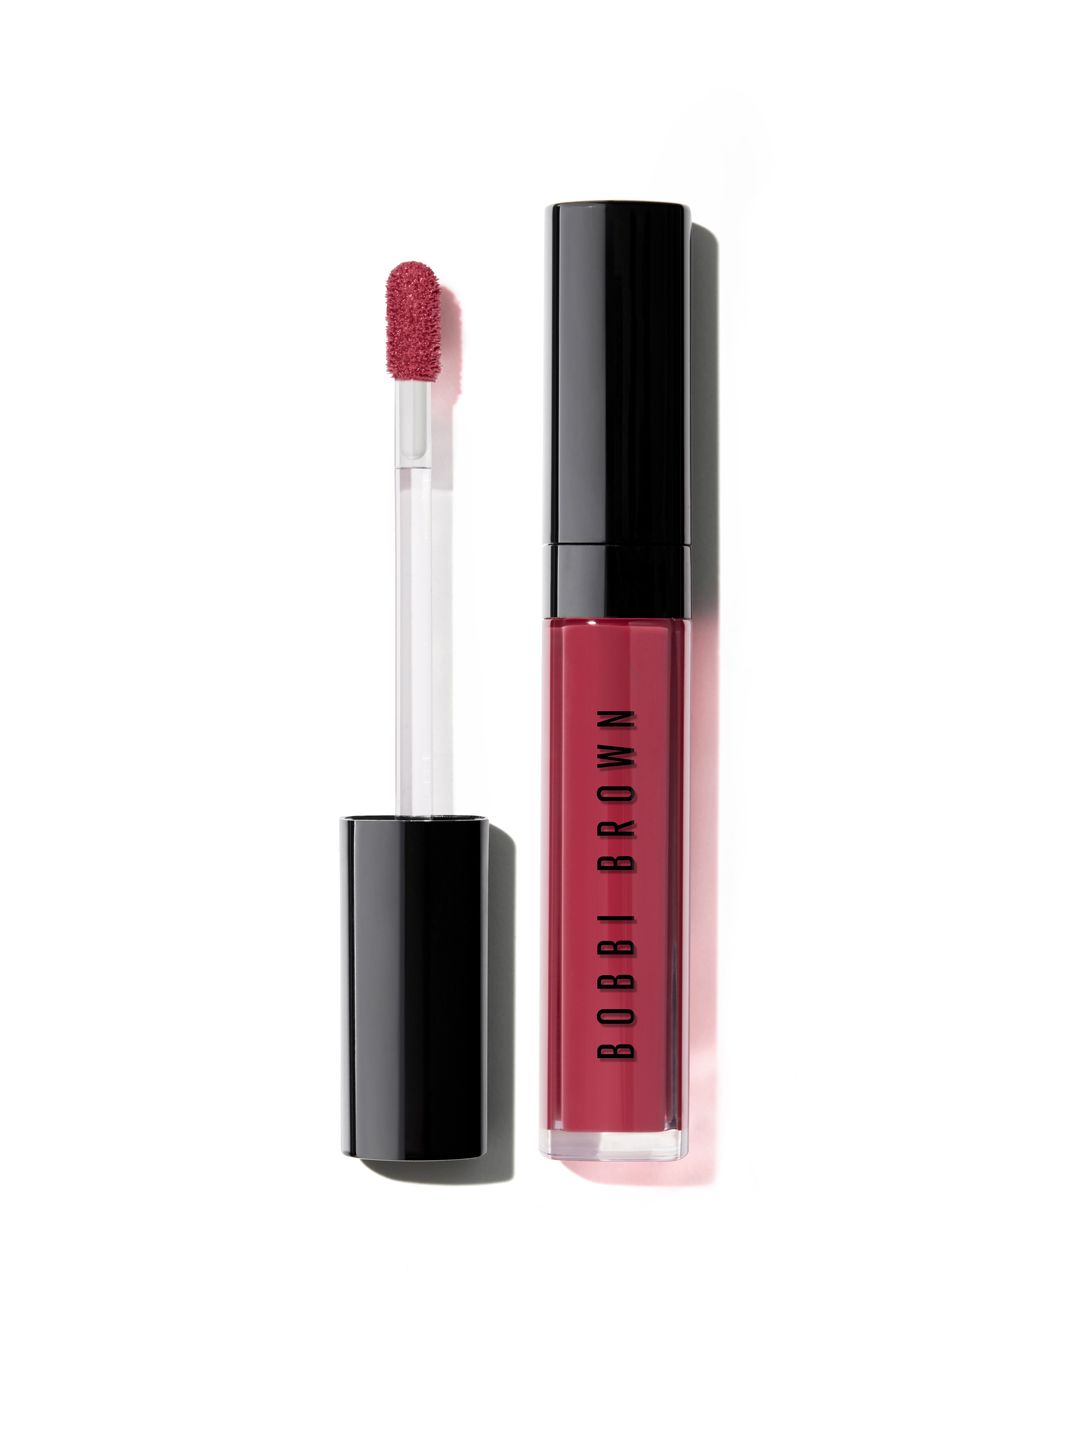 Bobbi Brown Crushed Oil Infused Gloss Slow Jam 6 ml Price in India